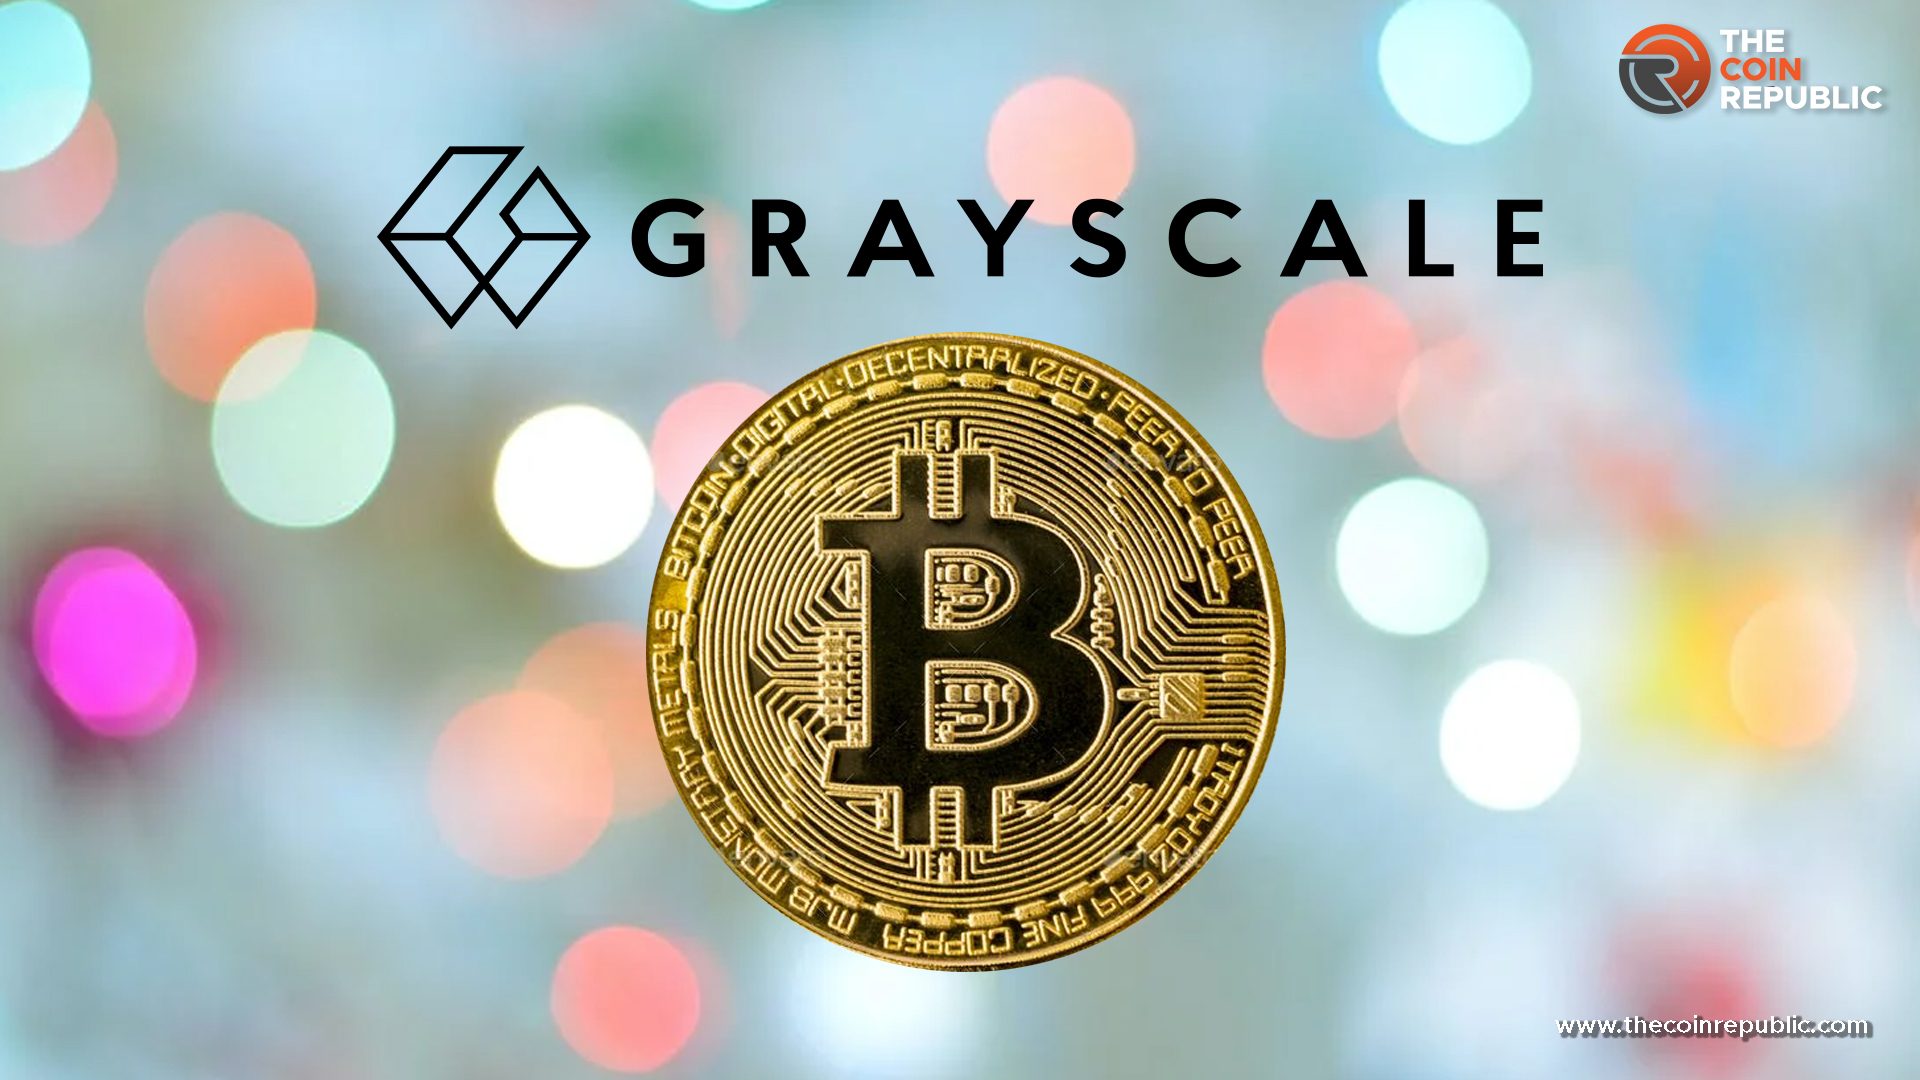 Grayscale is Being Sued by Hedge Fund, but Why?